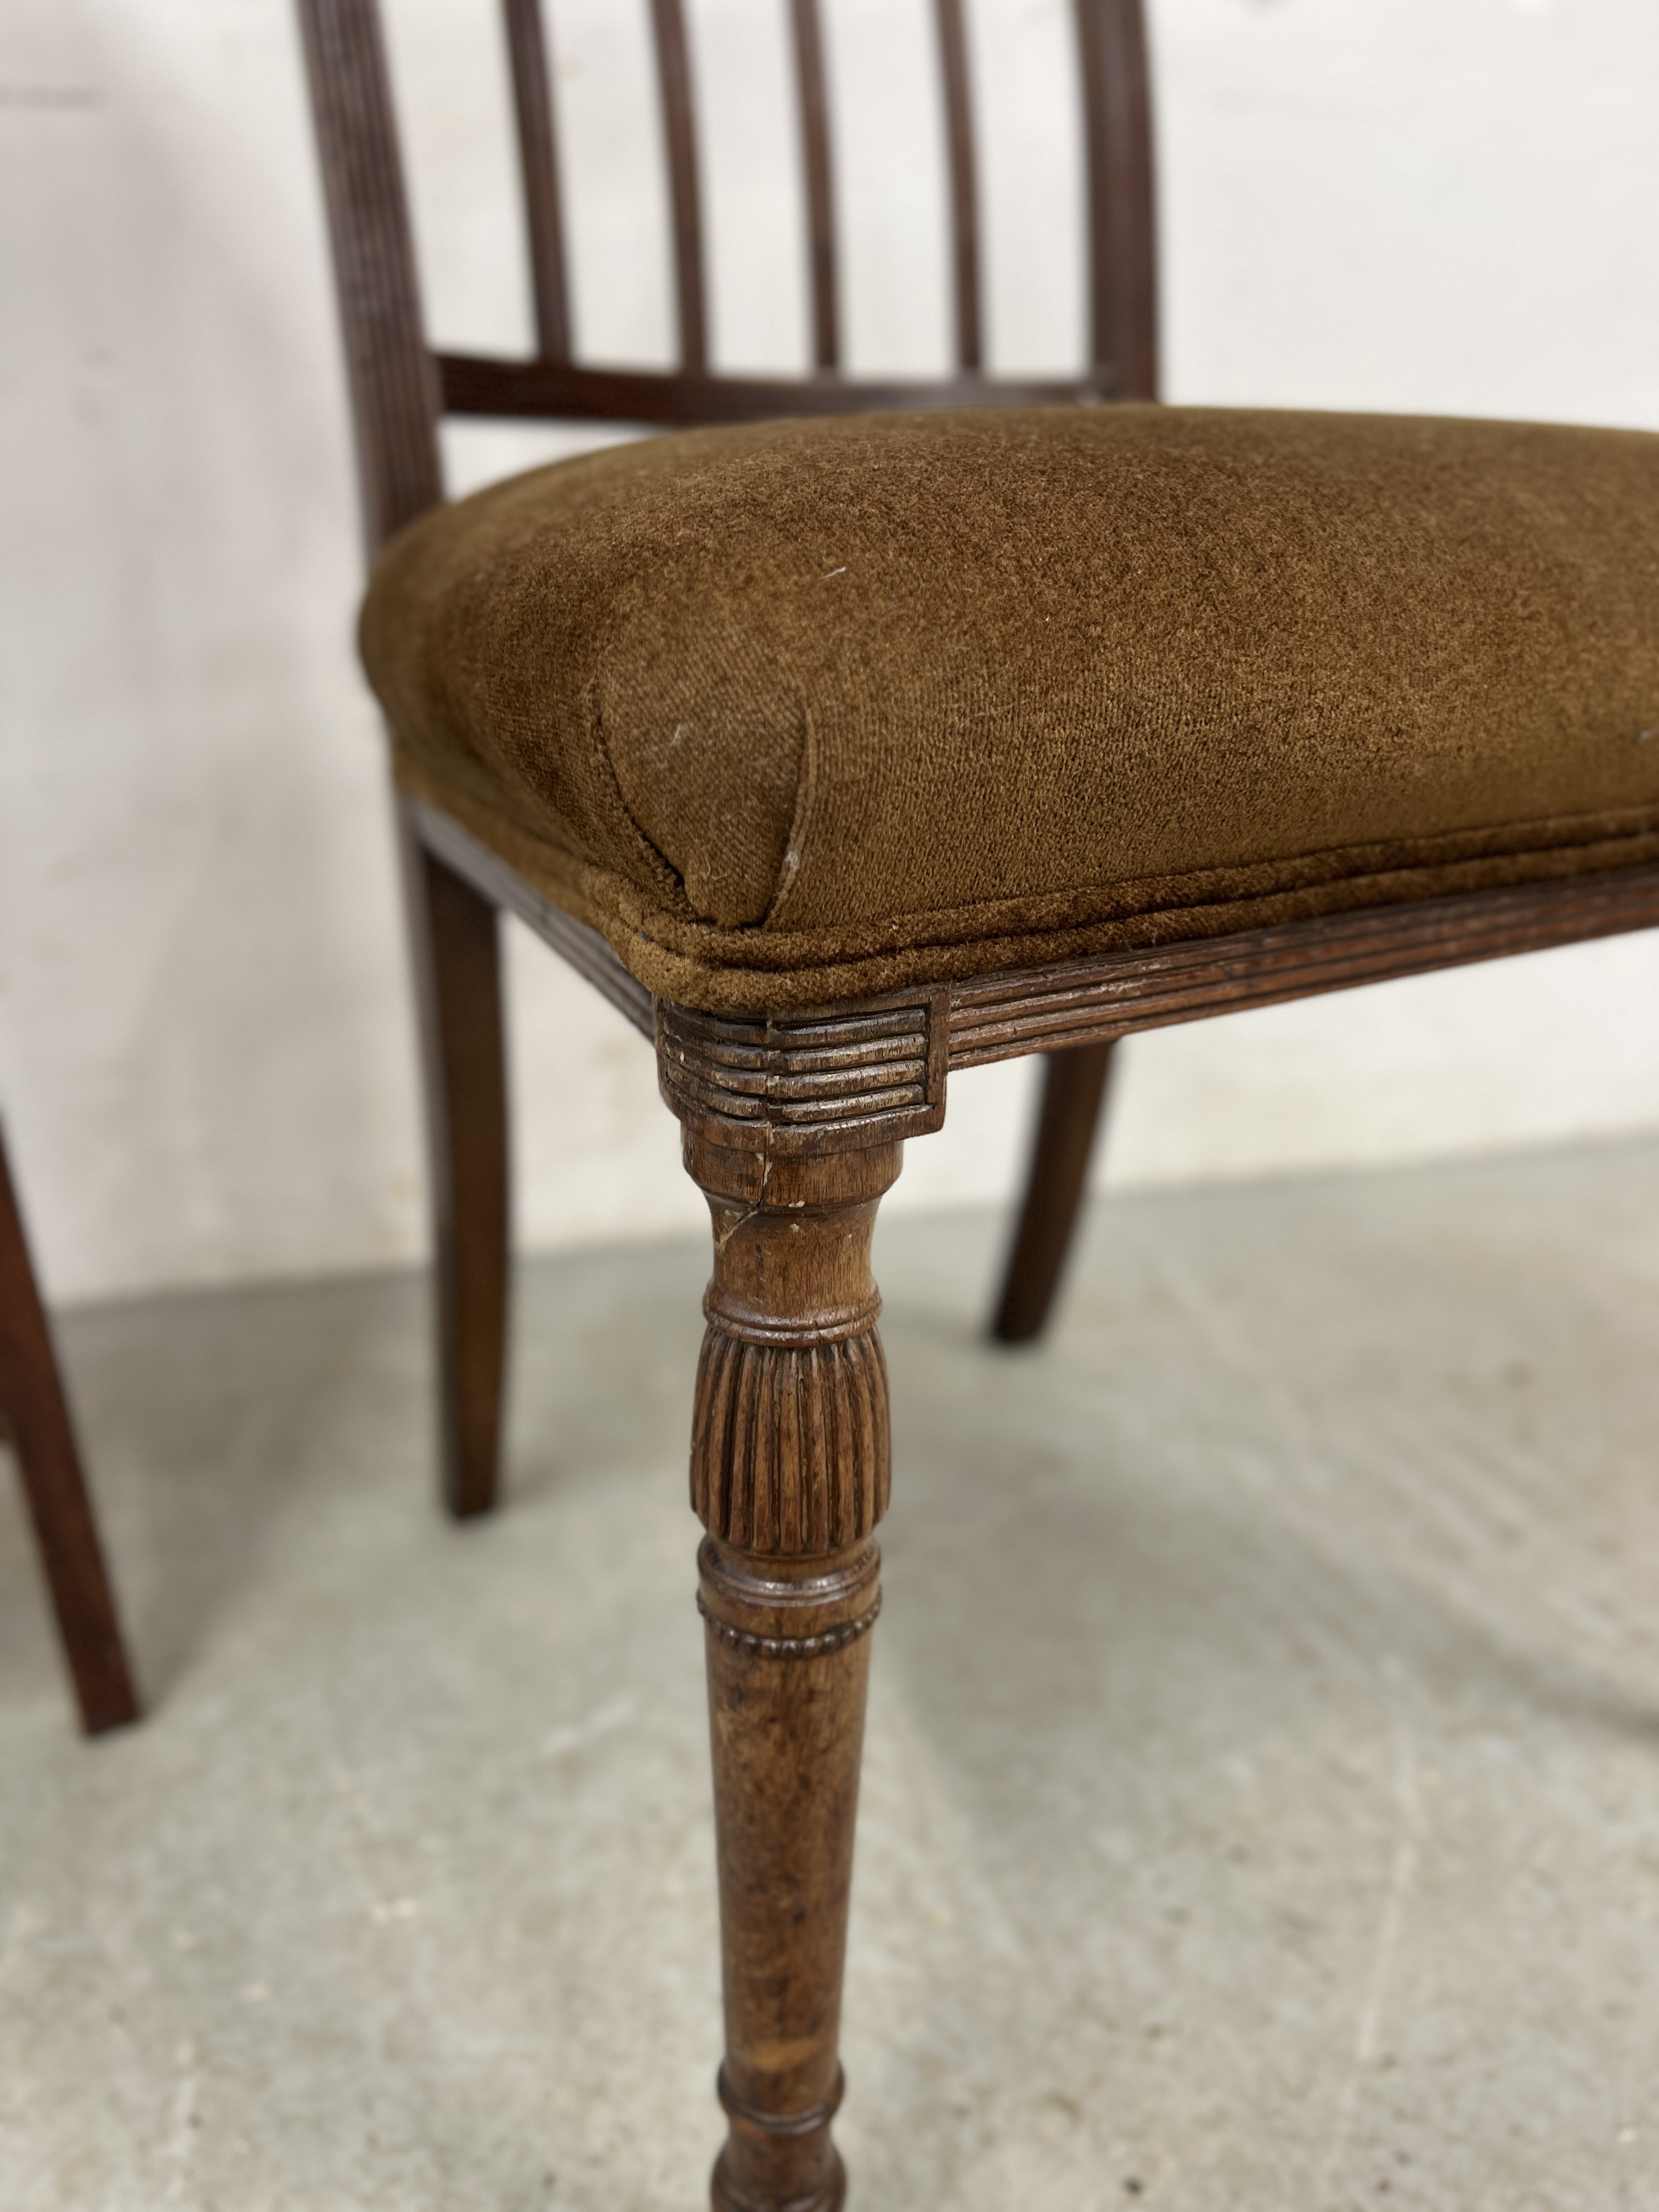 A GEORGIAN MAHOGANY SIDE CHAIR WITH BROWN VELOUR STUFF OVER SEAT ALONG WITH A MAHOGANY PLANT STAND - Image 5 of 8